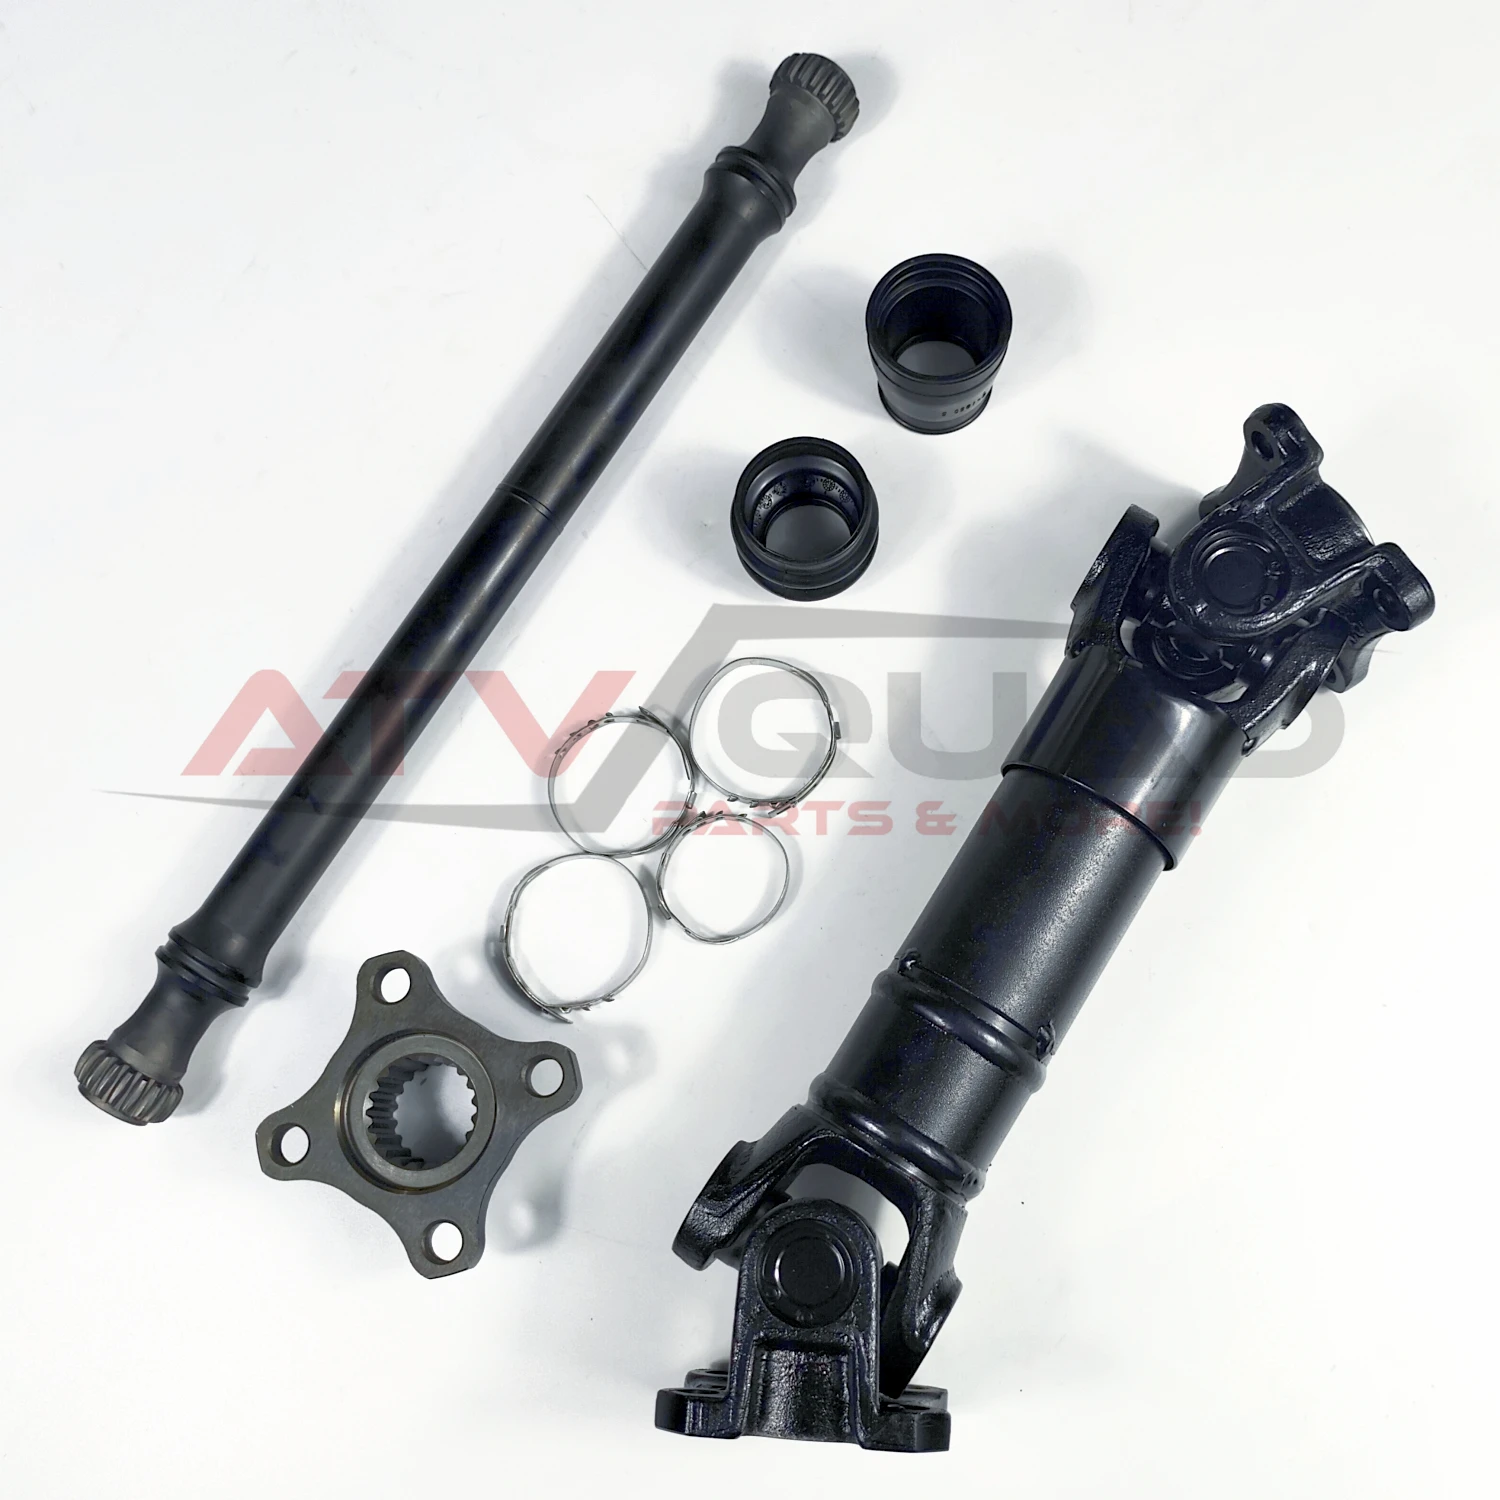 Front Rear Drive Shaft Kit for CFmoto 500HO 550 X550 X5H.O. 2014-2019 600 Touring 625 2018-2020 ATV 9CR6-290100 9CR6-300200 front drive shaft for cfmoto cforce 550 x550 x5ho cf500au 6l 600 touring cf600atr l t3b atv 9cr6 290100 00001